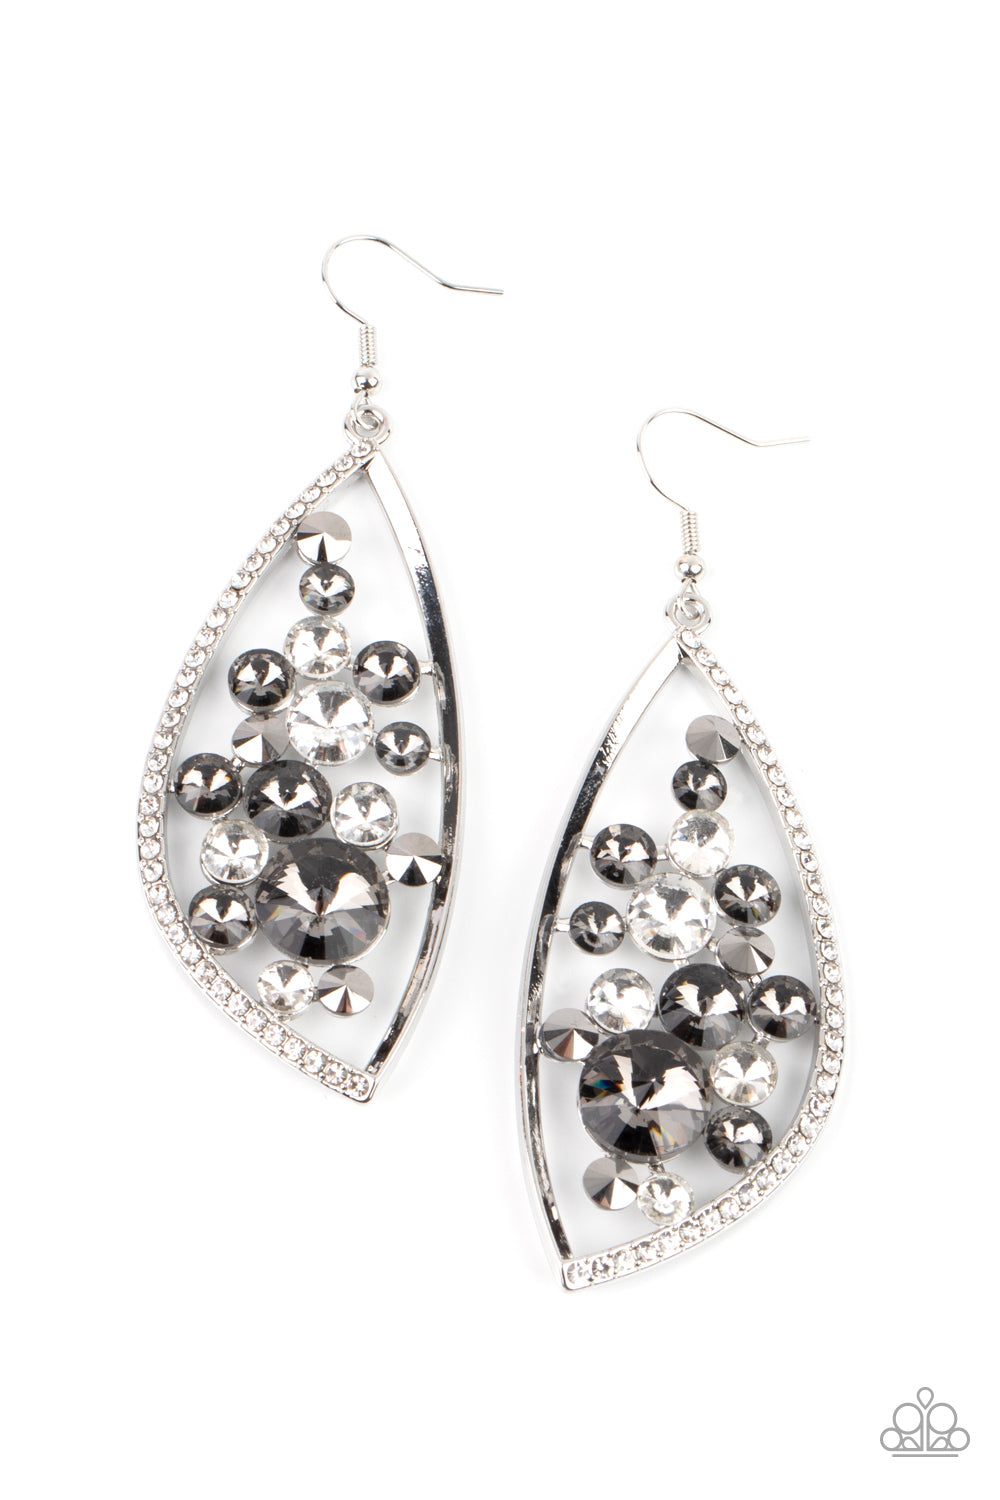 Sweetly Effervescent Silver Earring - Paparazzi Accessories  A bubbly collection of white, smoky, and hematite rhinestones coalesce inside an asymmetrical silver frame. One side of the frame is encrusted in glassy white rhinestones, adding a refined flair to the bubbly lure. Earring attaches to a standard fishhook fitting.  Sold as one pair of earrings.